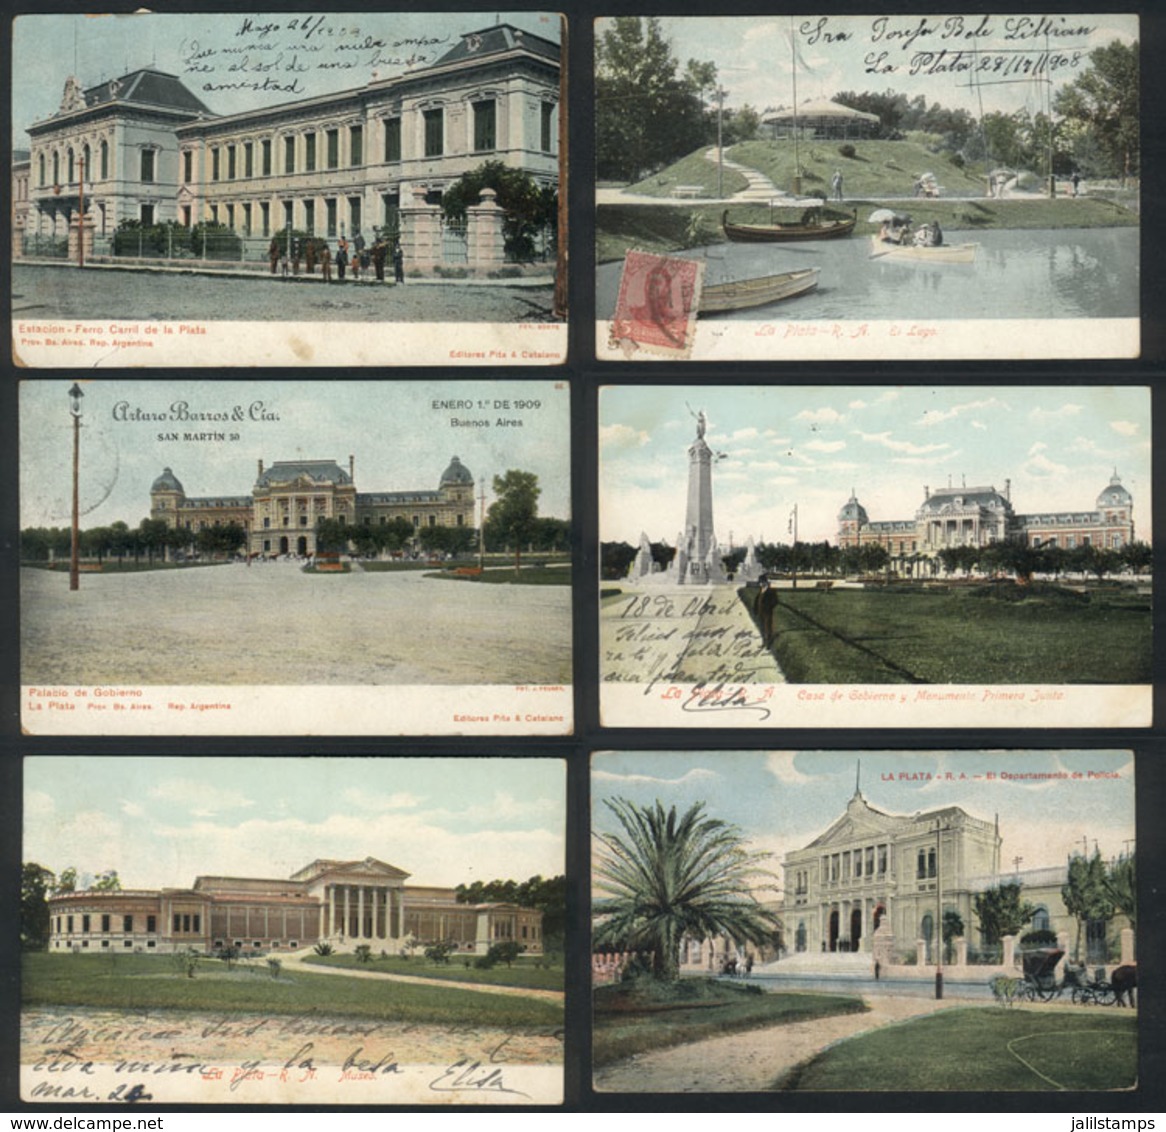 290 ARGENTINA: LA PLATA: 6 Old Postcards With Good Views Of The City, Fine To VF Quality, - Argentina